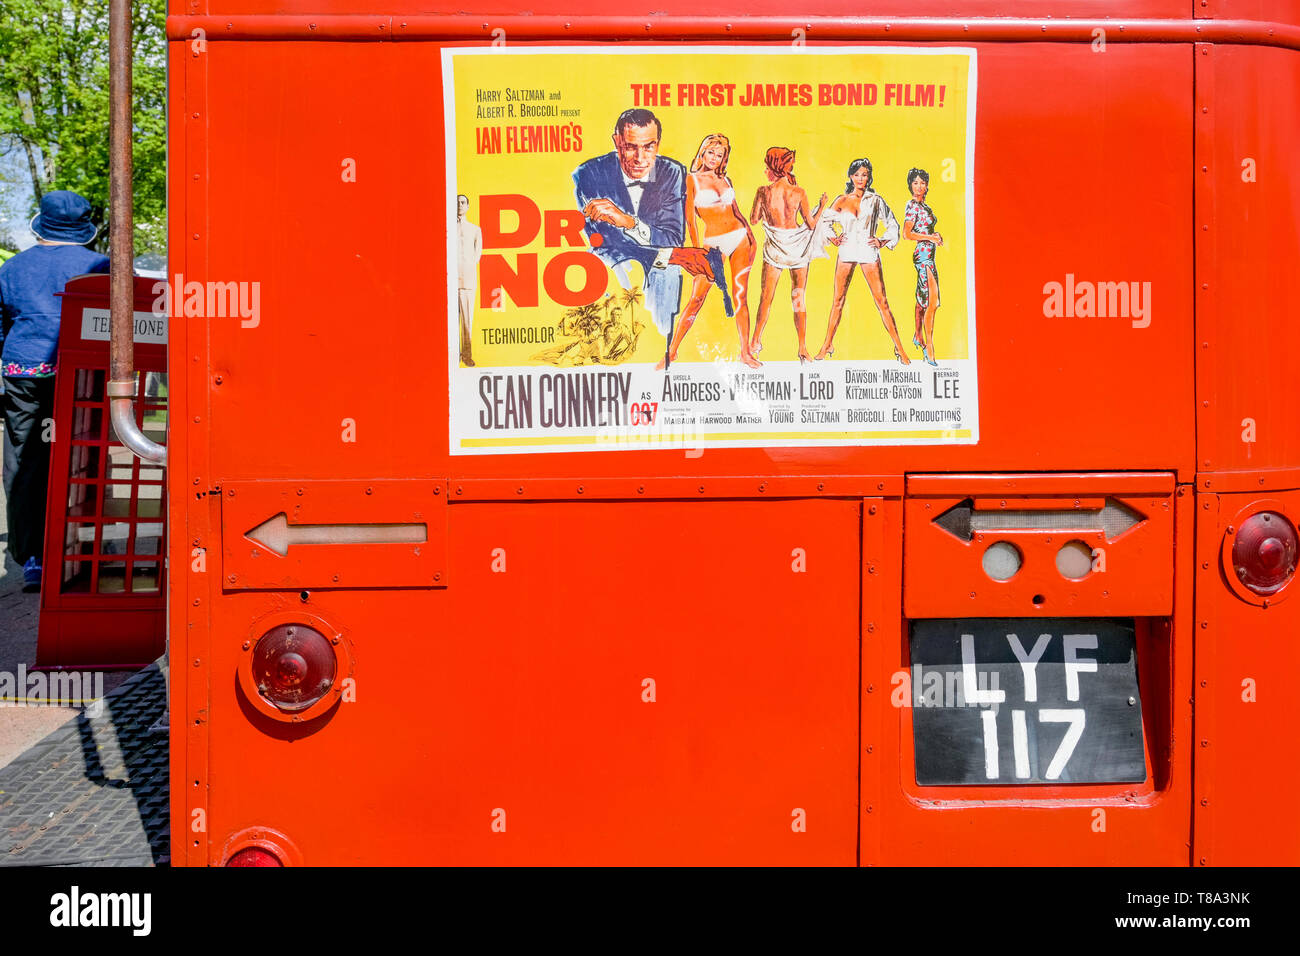 red Double Decker bus with Sean Connery, Dr No Movie poster ad Stock Photo